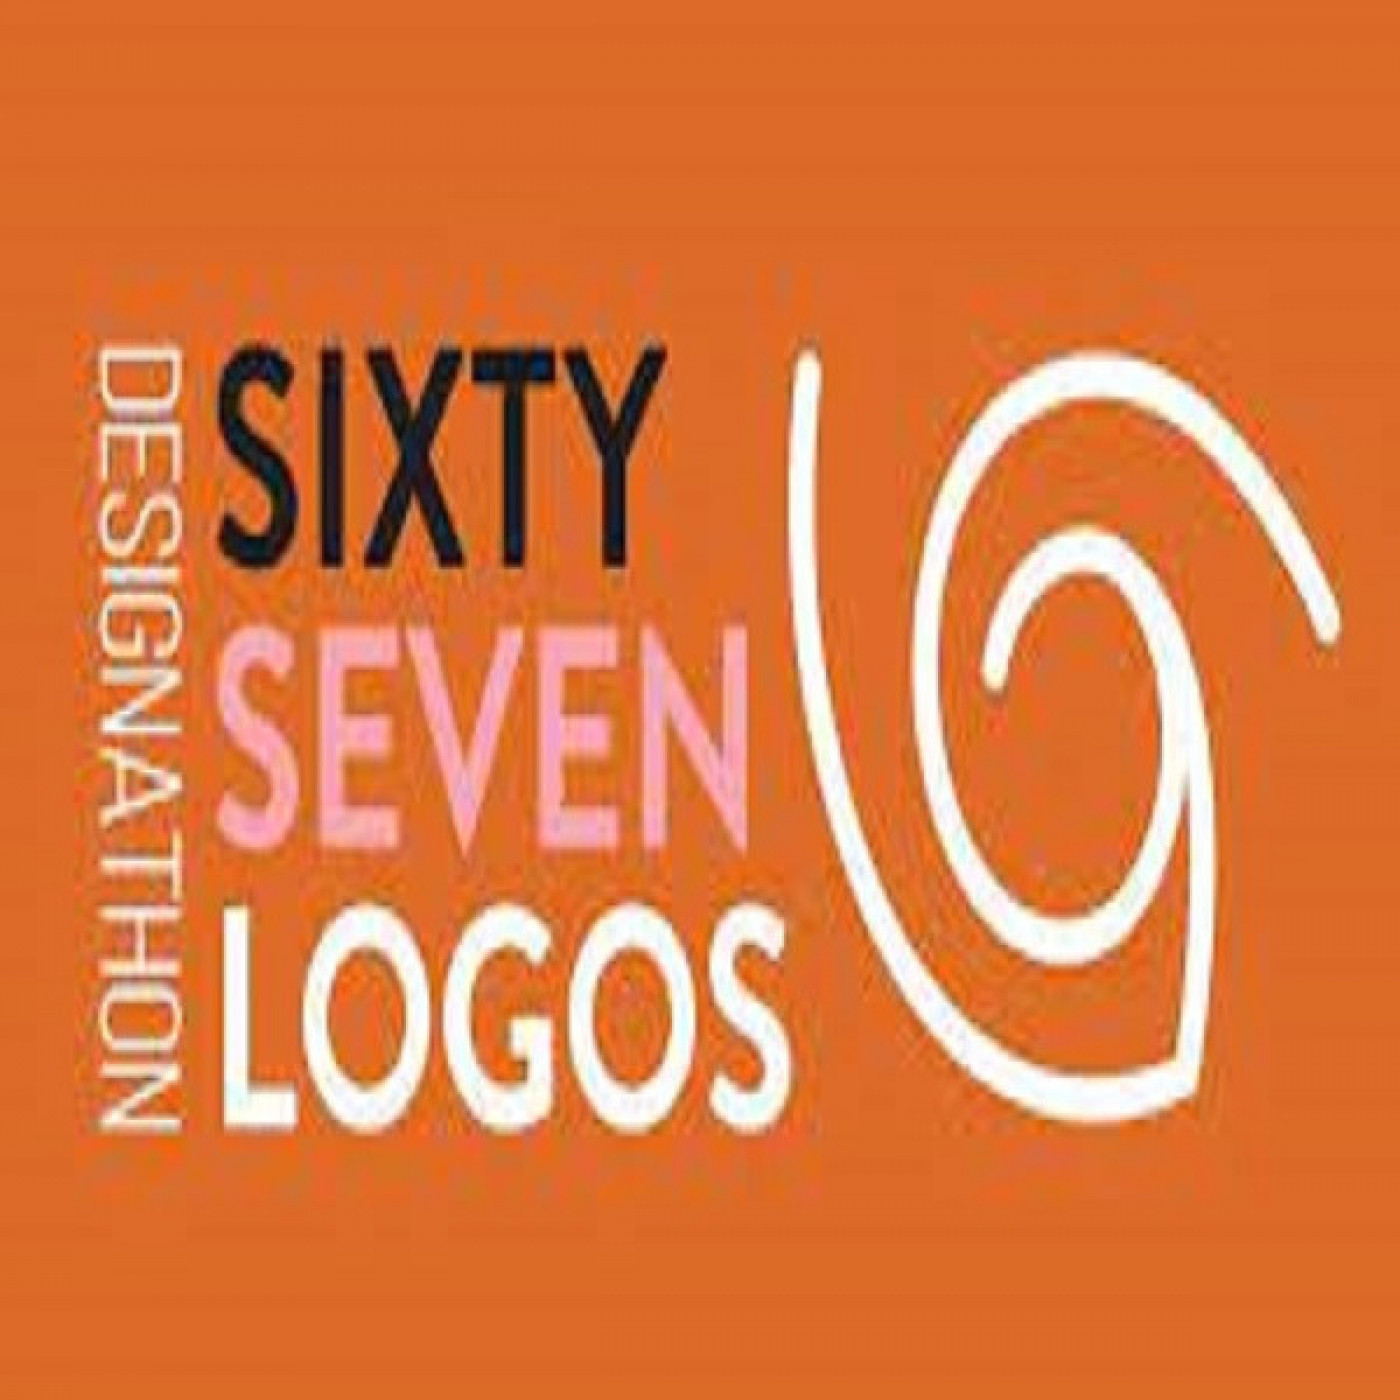 Call for SME’s to be a part of an initiative set to design logo’s at no cost